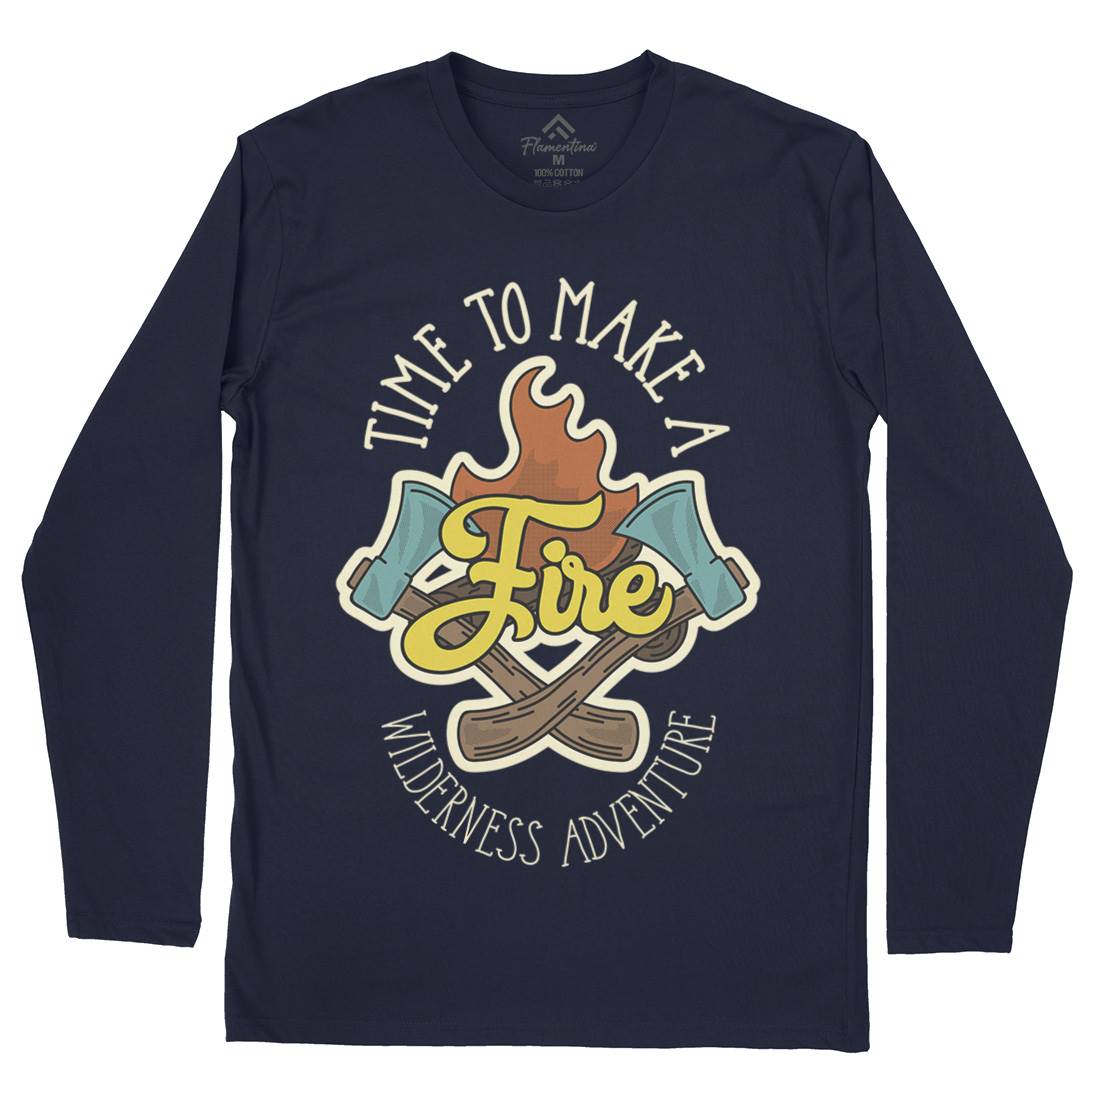 Time To Make Fire Mens Long Sleeve T-Shirt Nature D992